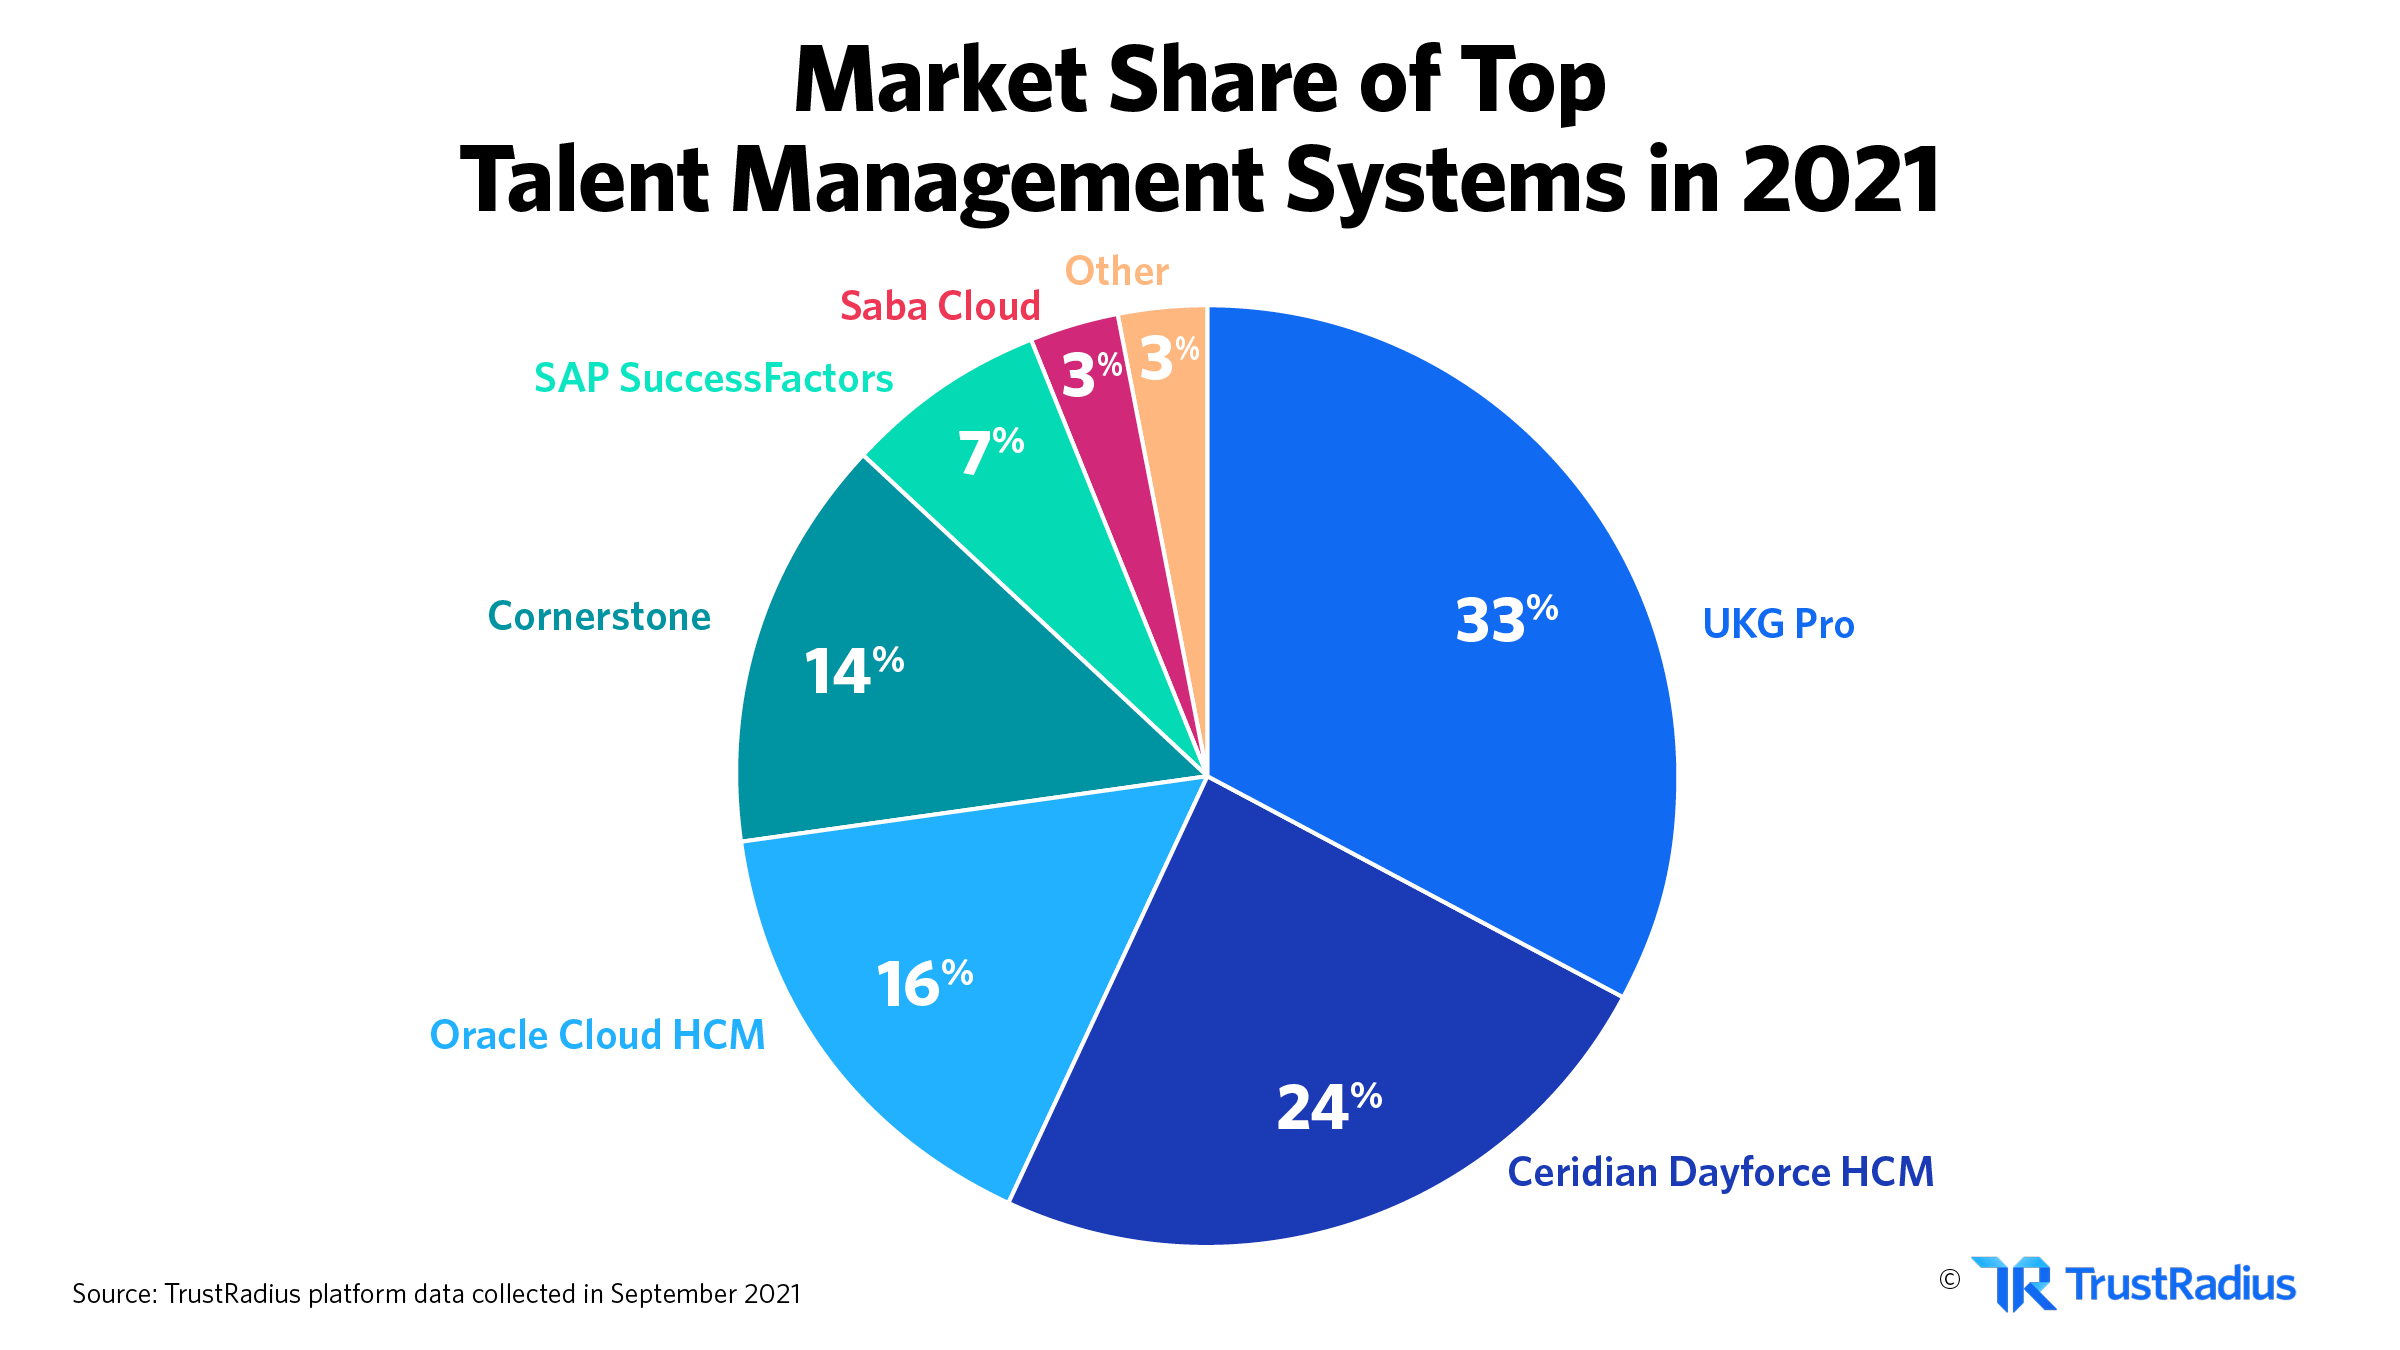 market share of the top talent management systems in 2021